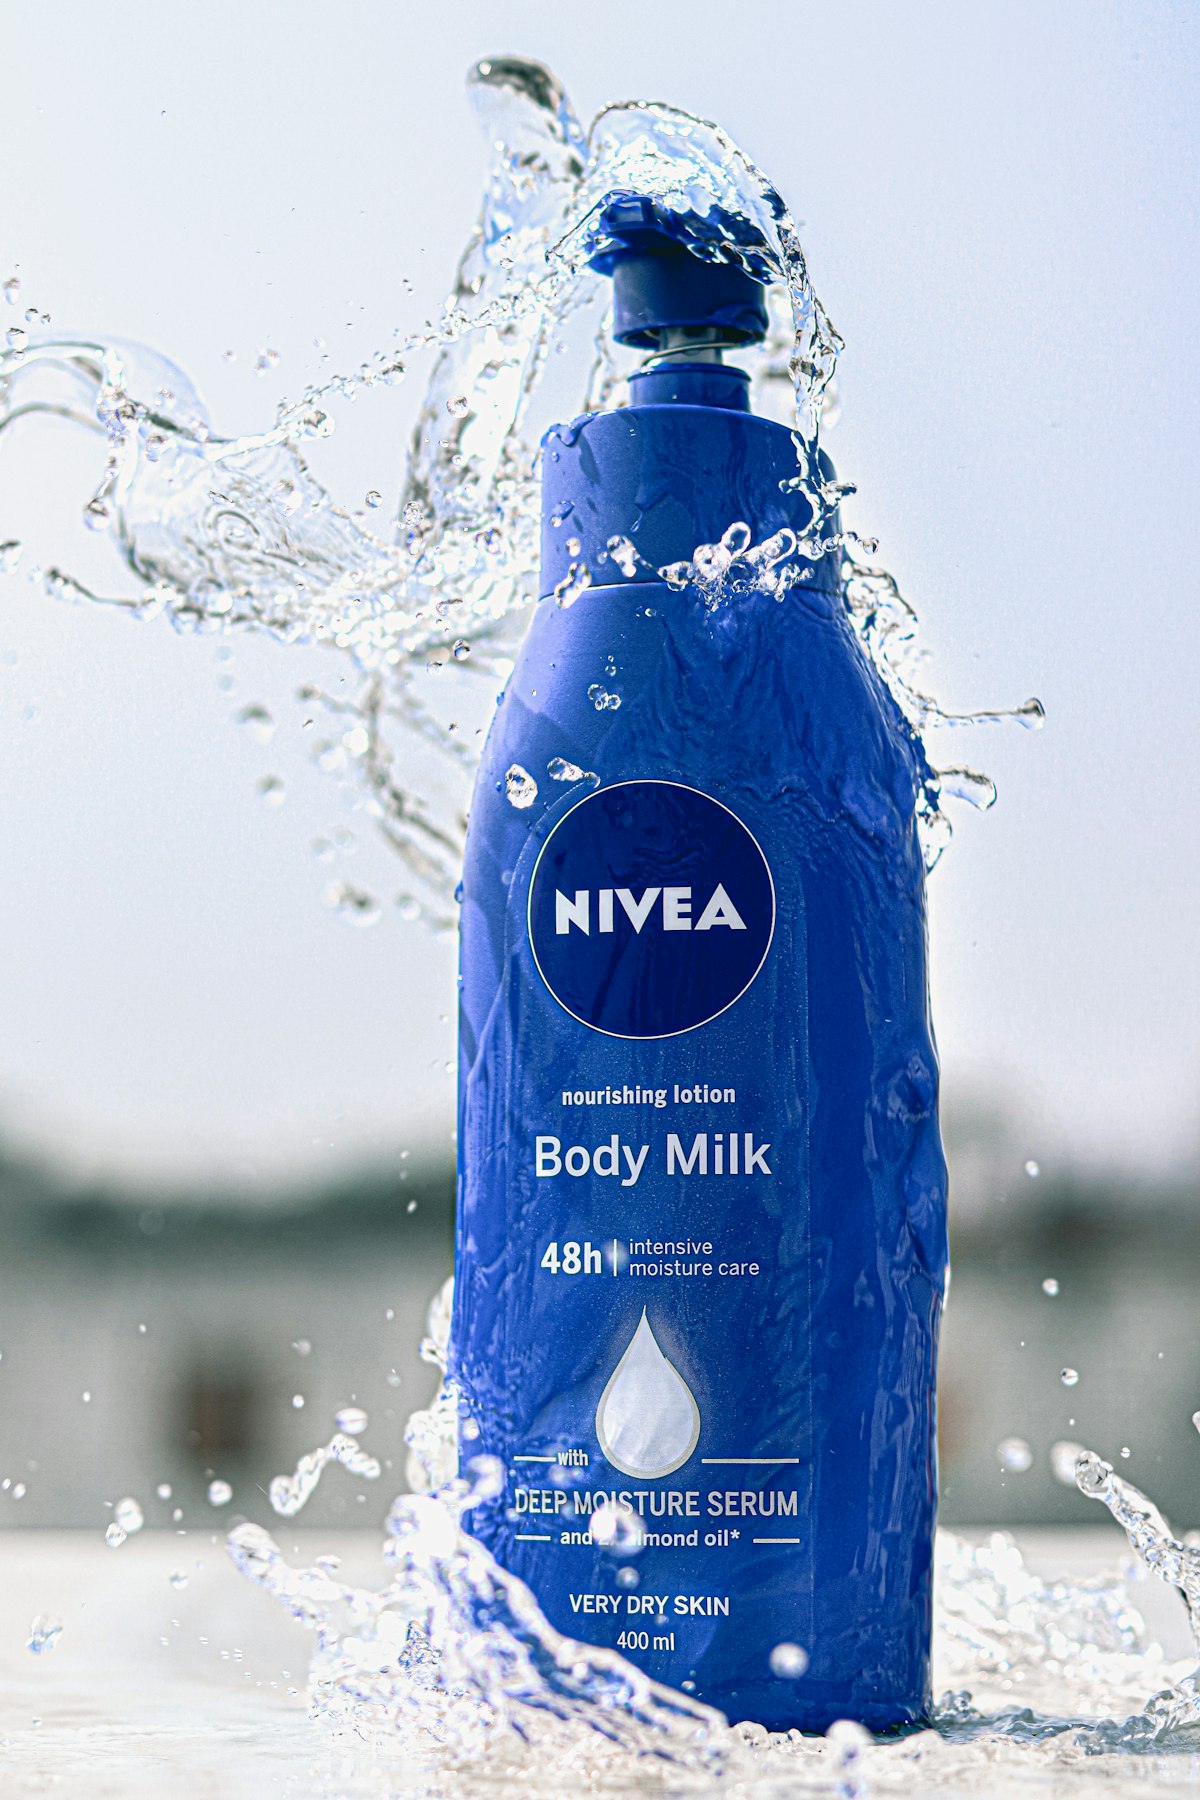 Nivea Debuts its First Non-Fungible Tokens, and They are for Free